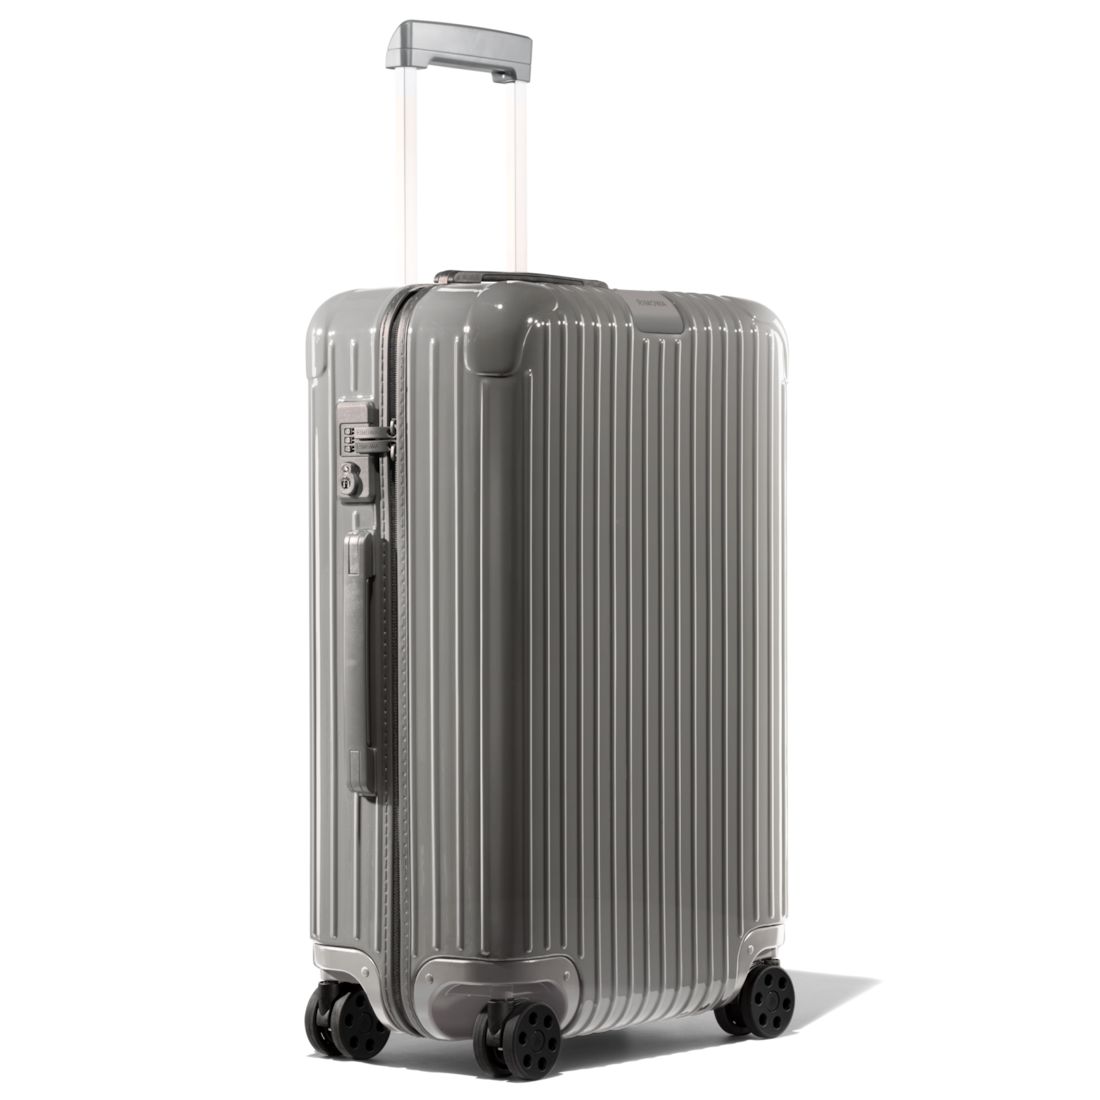 NEW Rimowa OFF-WHITE carry case bag 36L white clear See Through limited